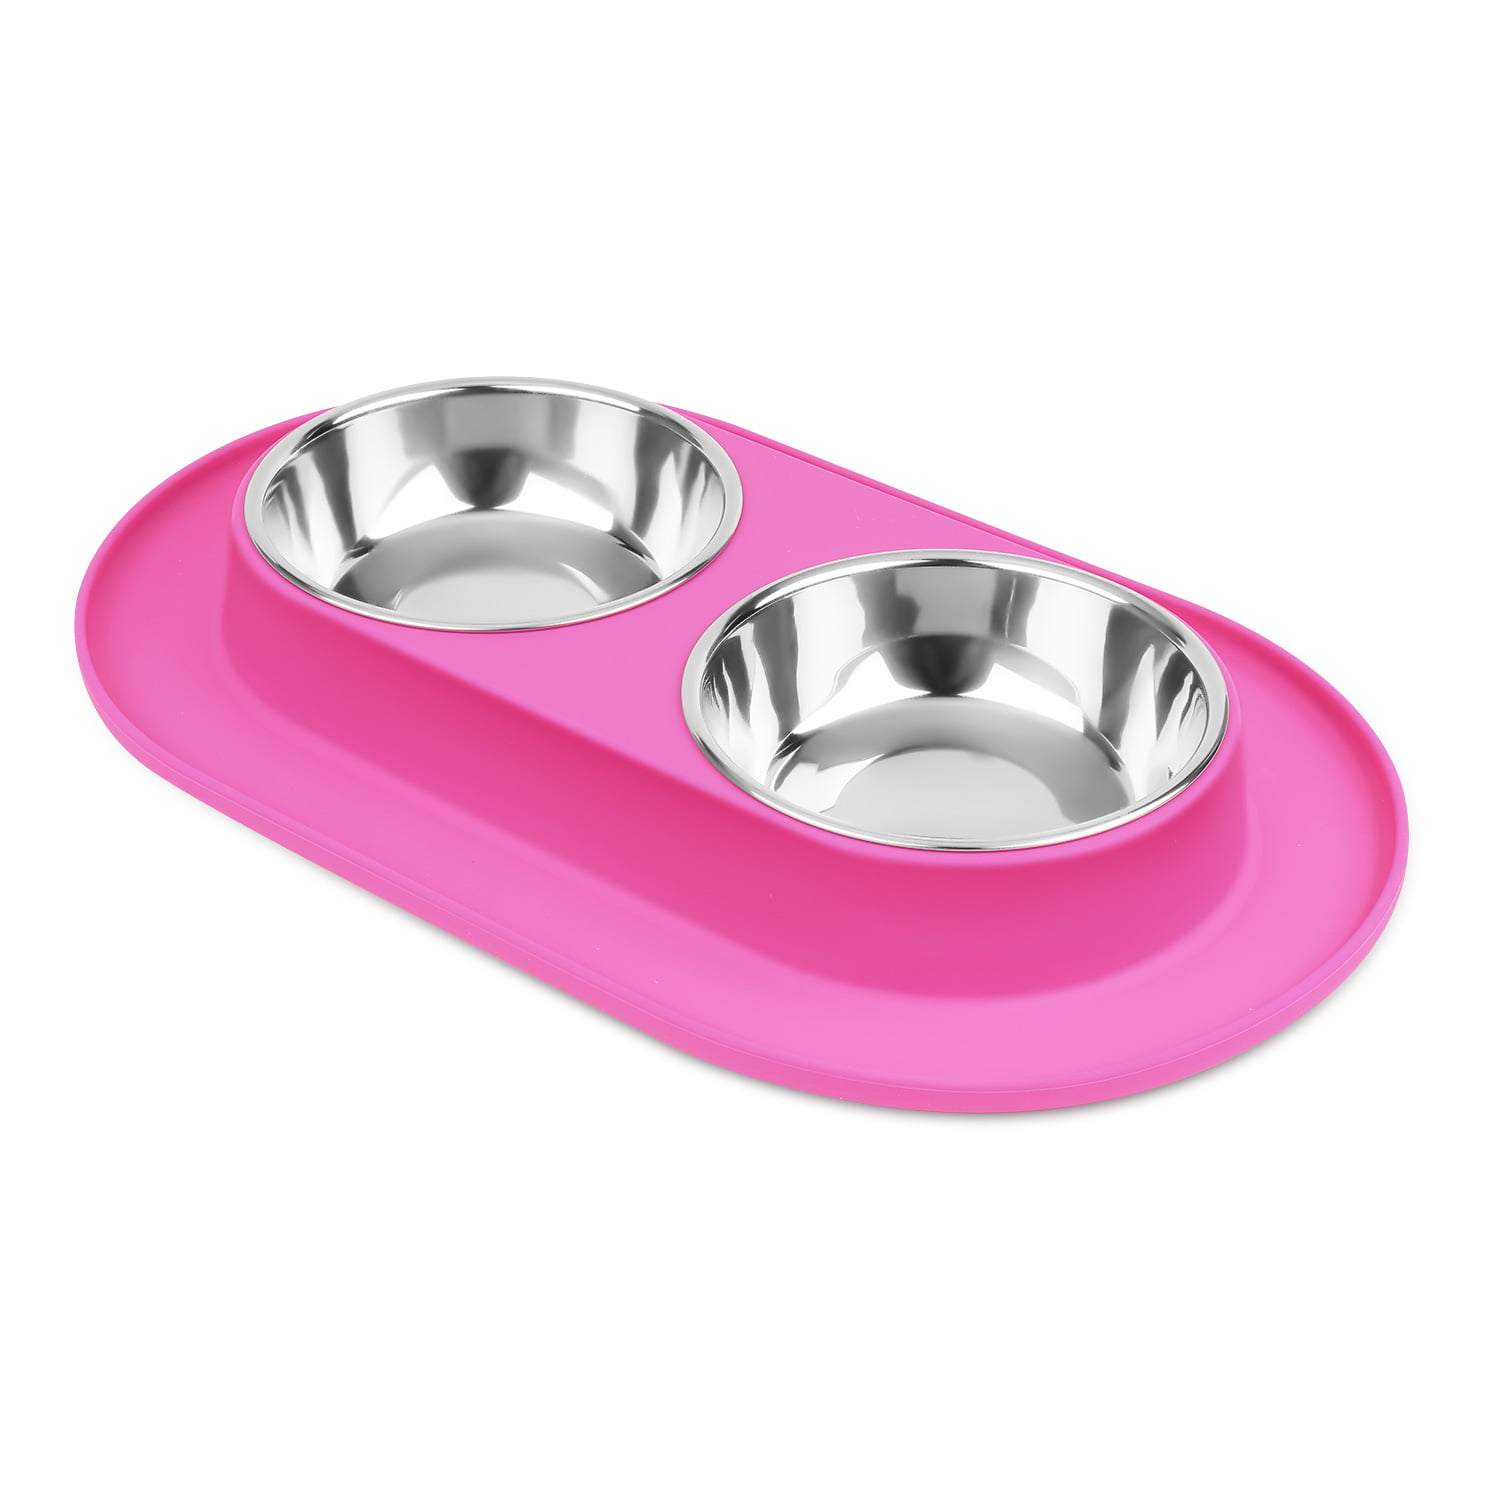 Hubulk Pet Dog Bowls 2 Stainless Steel Dog Bowl with No Spill Non-Skid  Silicone Mat + Pet Food Scoop Water and Food Feeder Bowls for Feeding Small